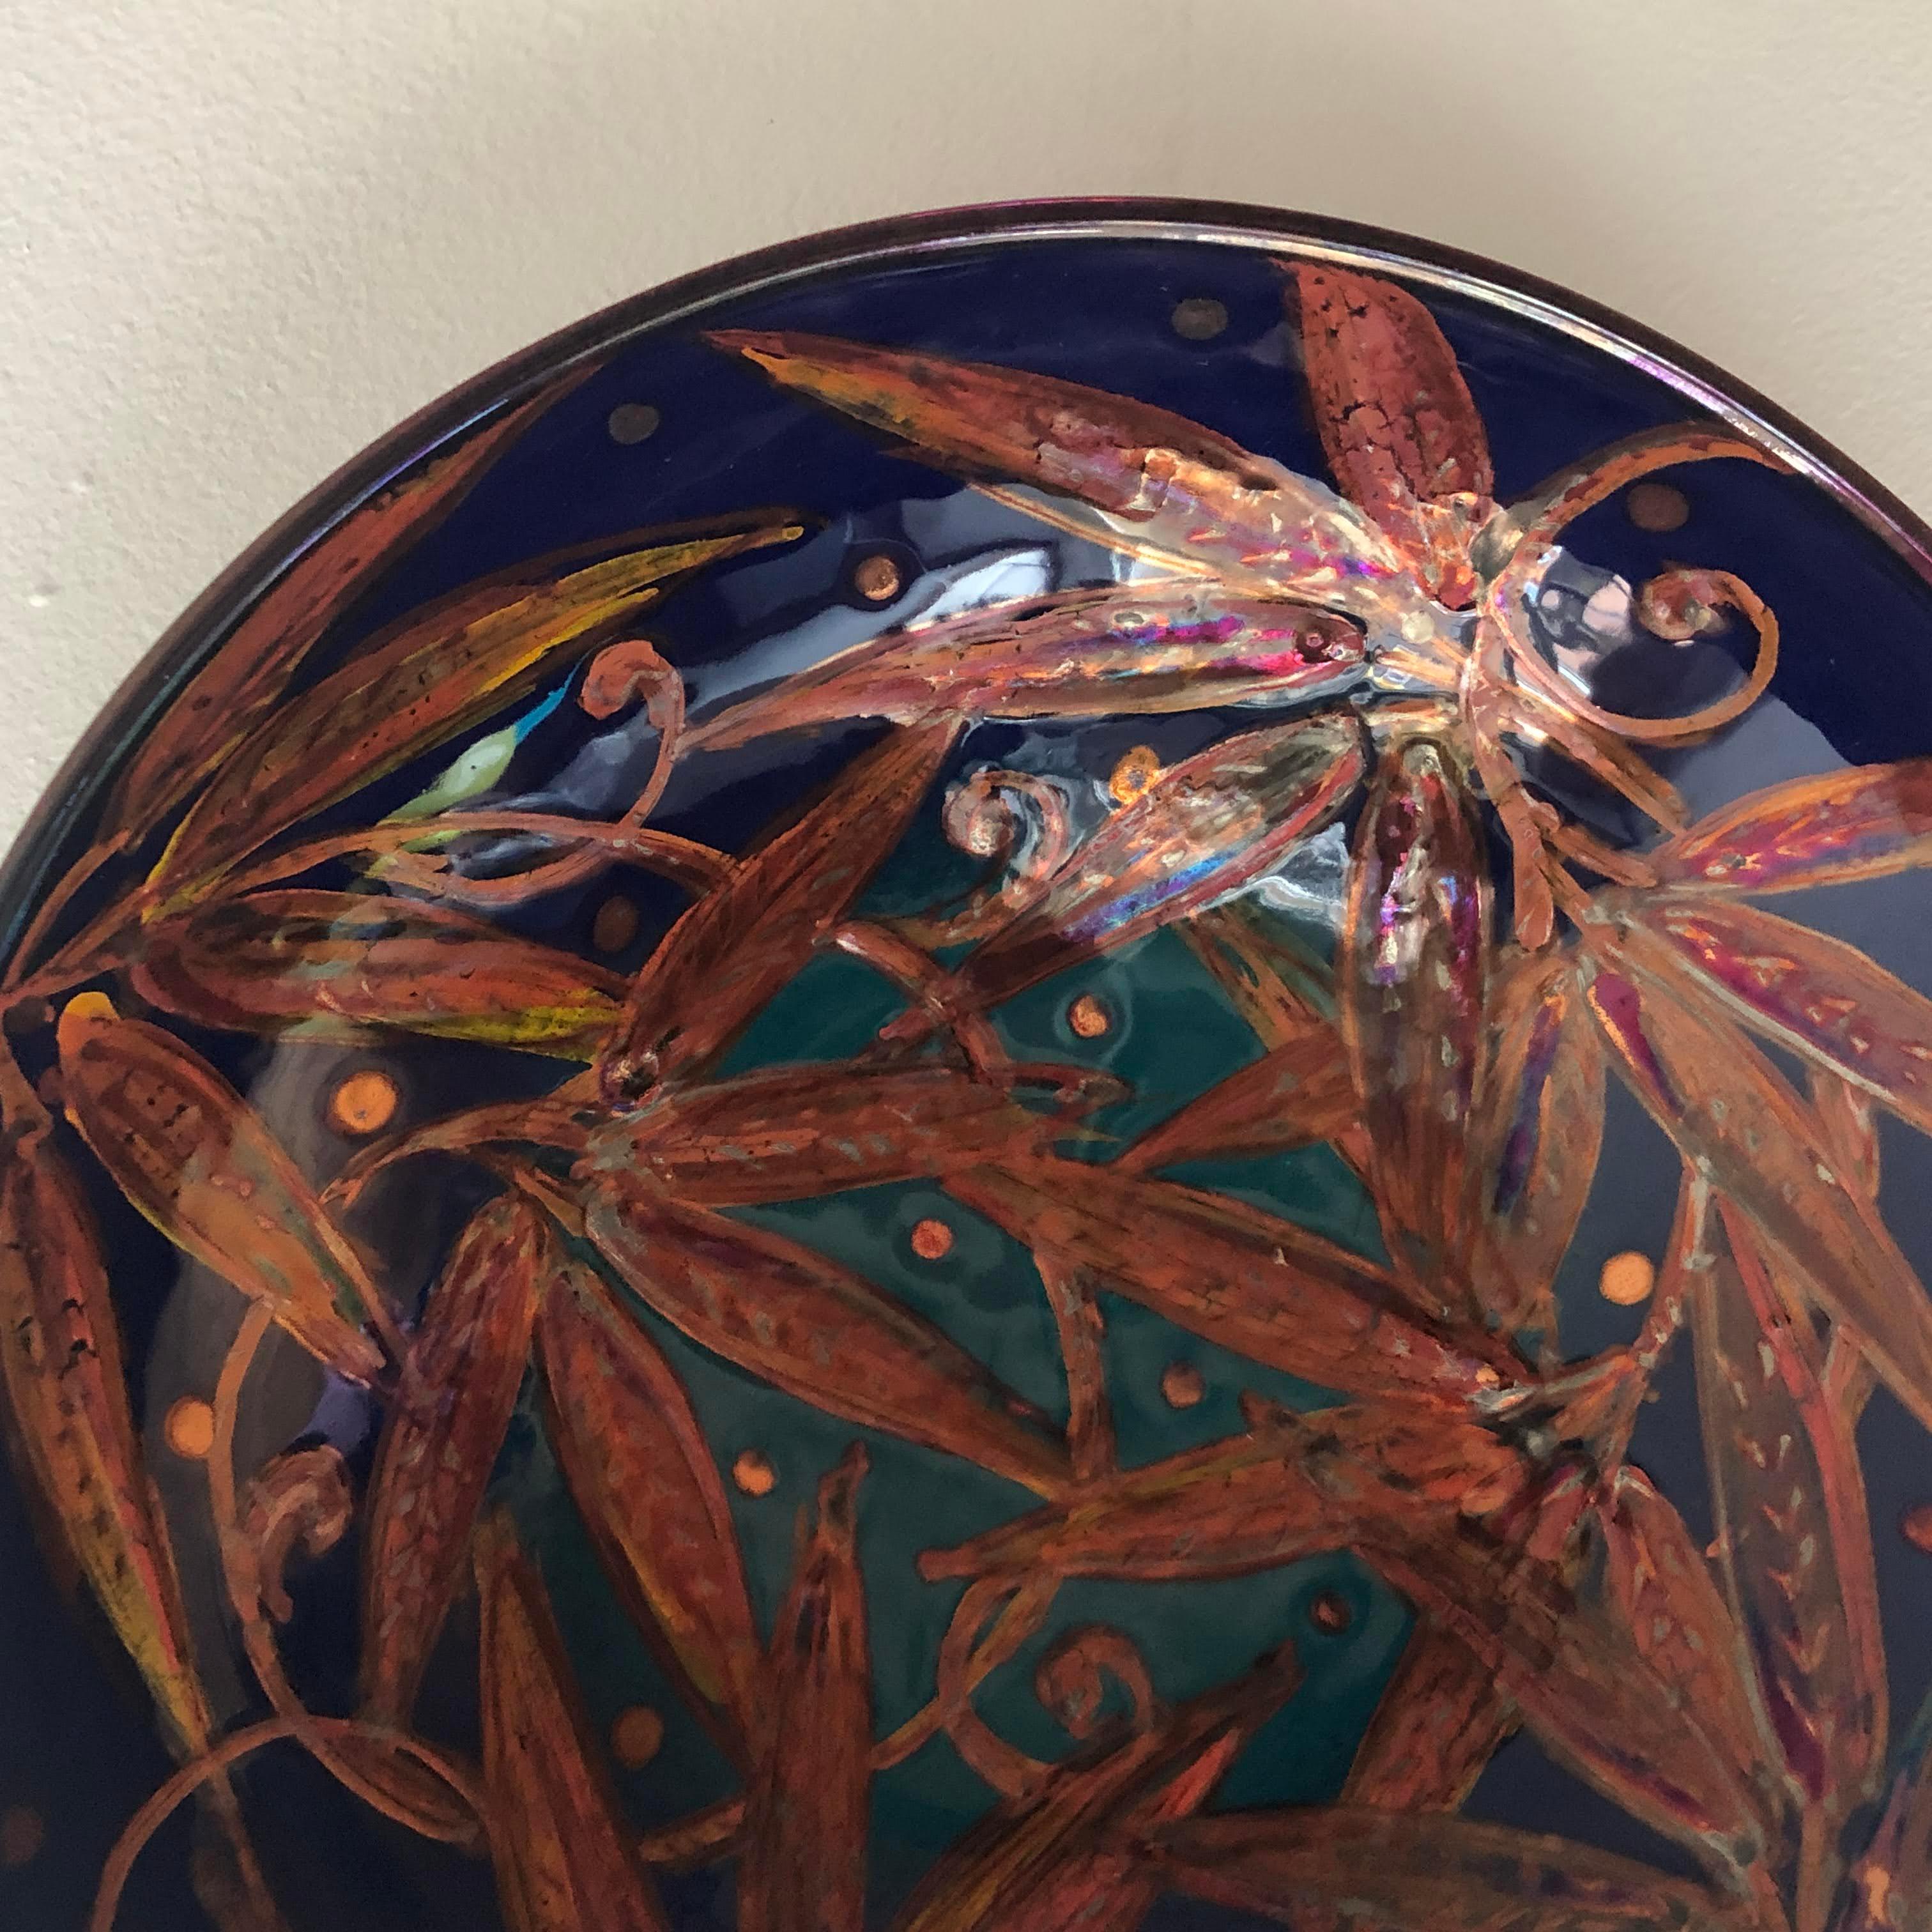 Ceramic Bowl by Bottega Vignoli Hand Painted Glazed Earthenware Contemporary In New Condition For Sale In London, GB